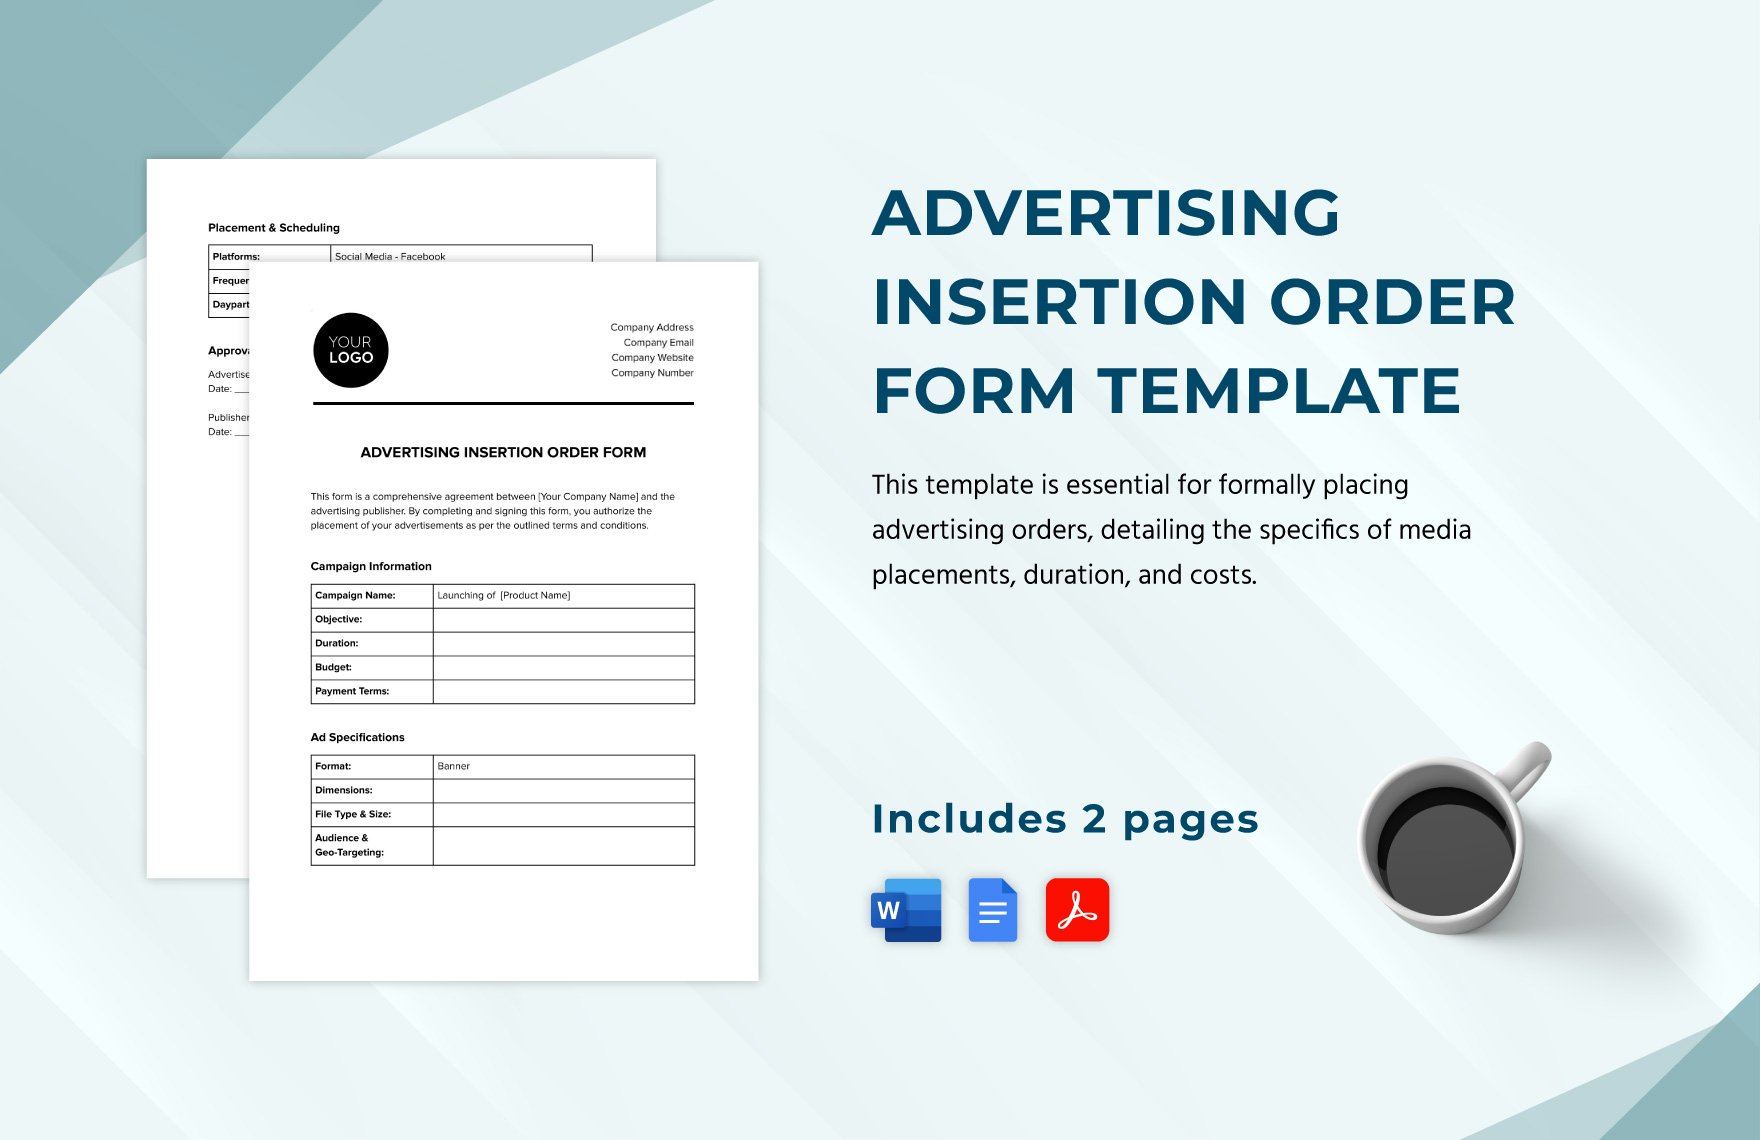 Advertising Insertion Order Form Template in Word, Google Docs, PDF